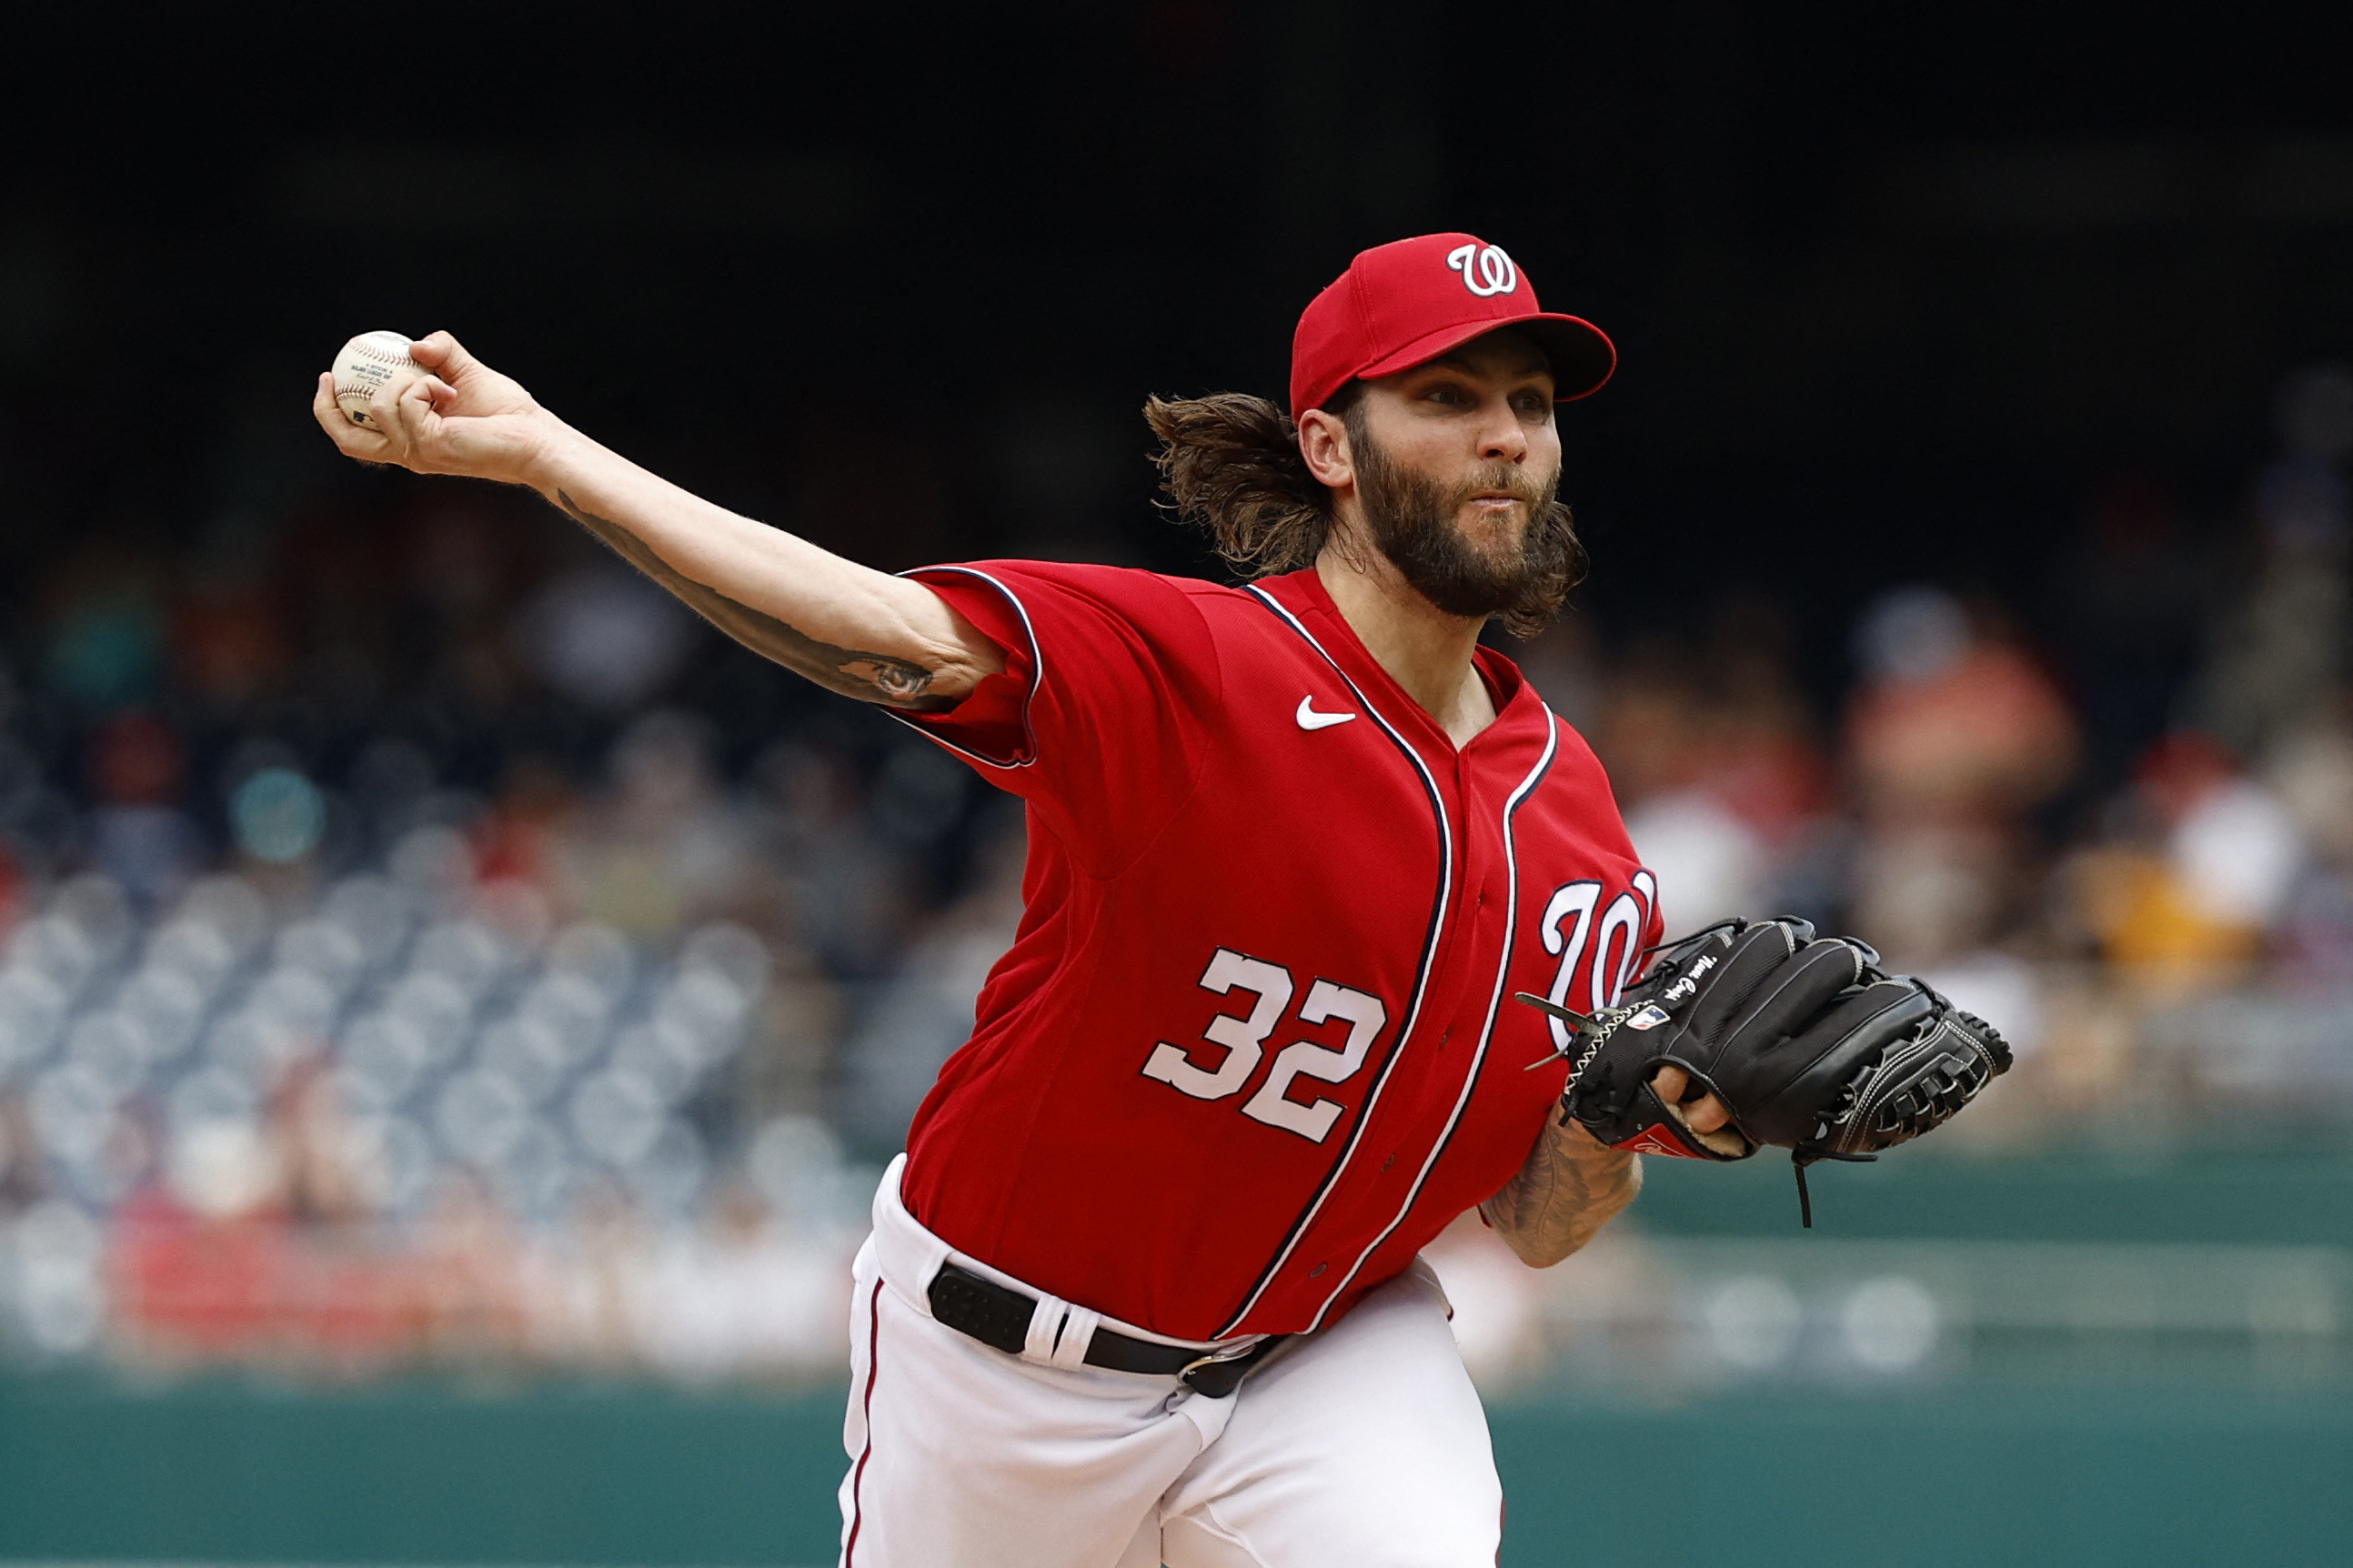 Washington Nationals may be out front in diversity in MLB